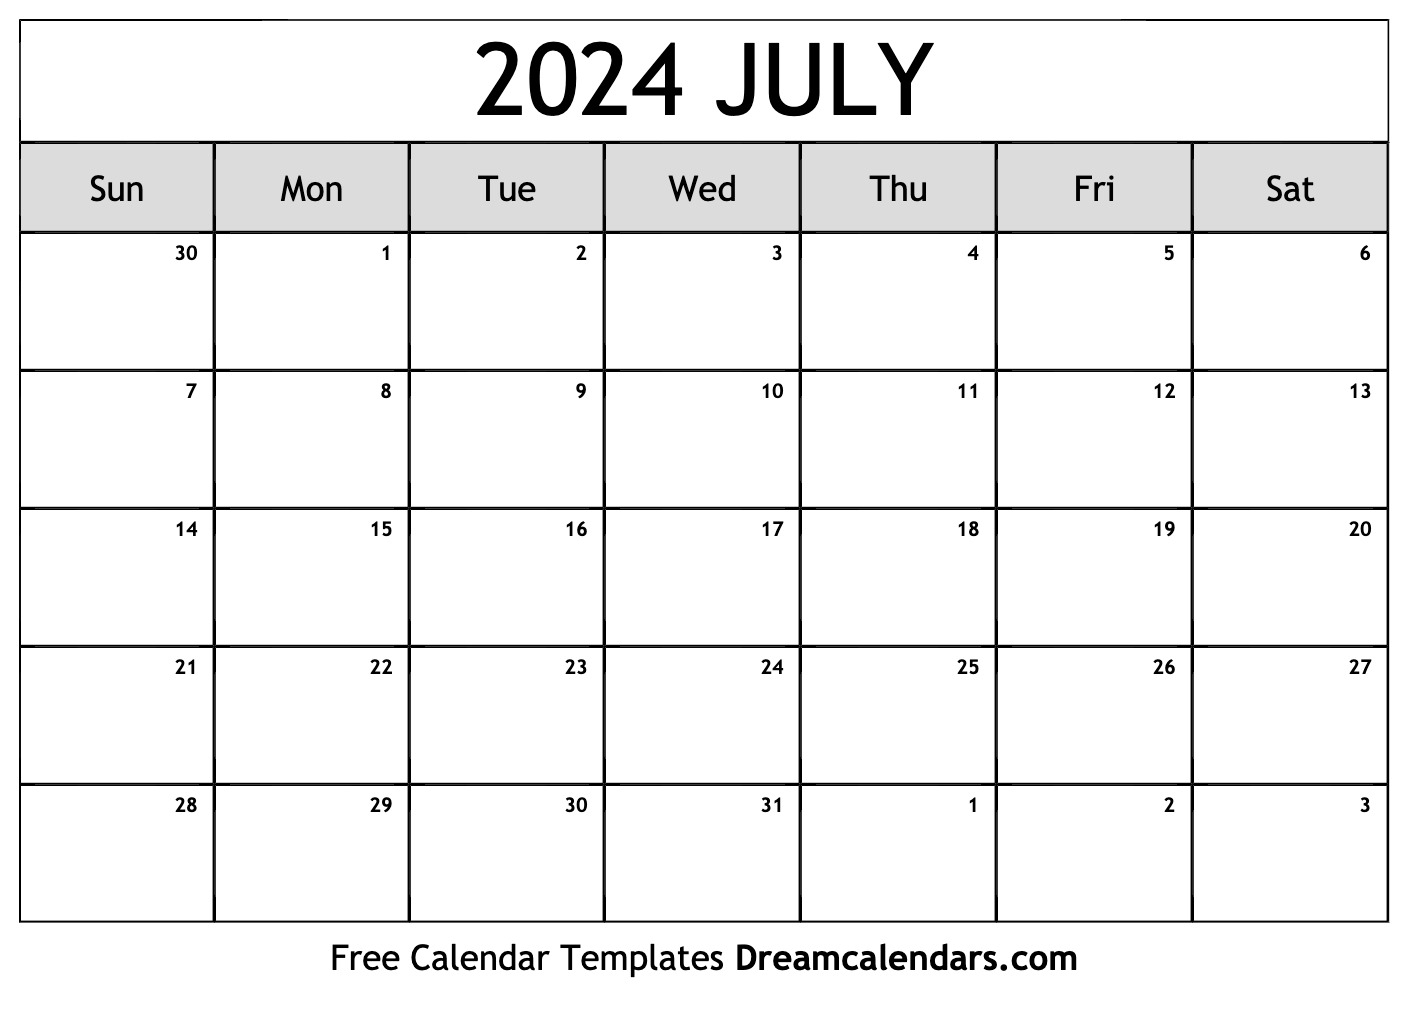 July 2024 Calendar | Free Blank Printable With Holidays for Free Printable Calendar 2024 July And August